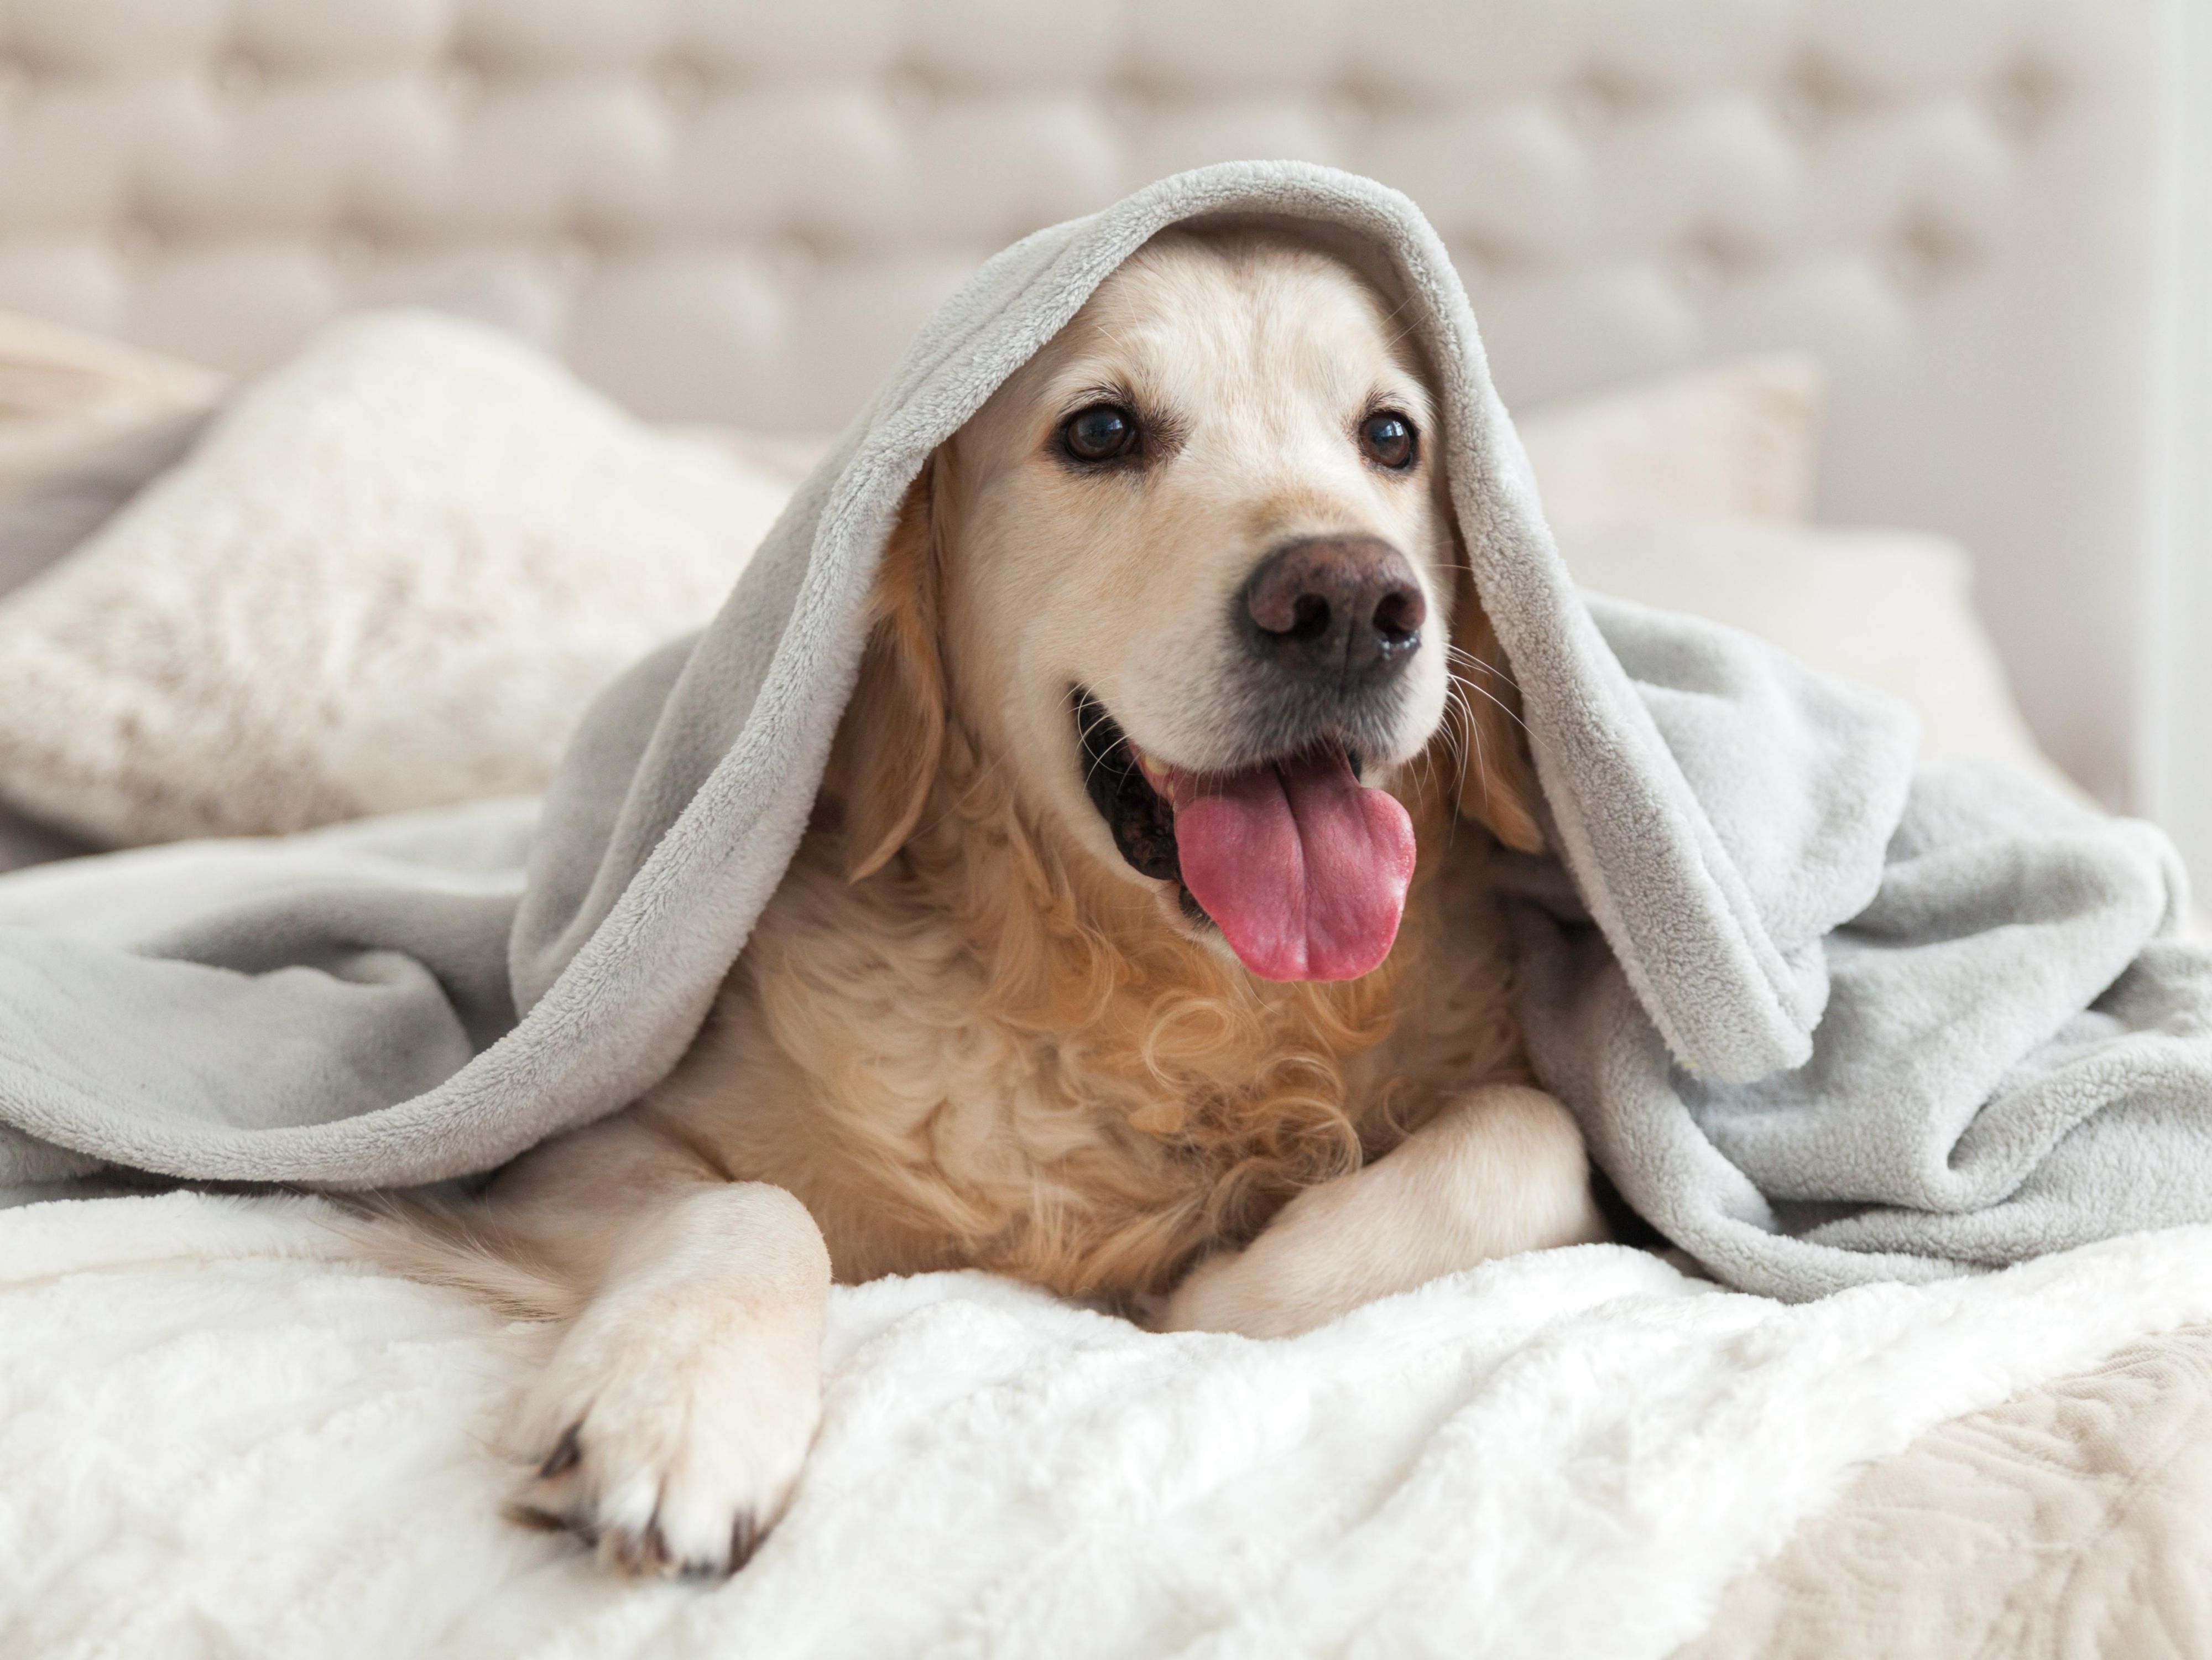 Welcome to our pet-friendly Crowne Plaza in College Park. Enjoy modern accommodations and bring your furry friends along. We gladly welcome cats and dogs up to 100 lbs with a $50 pet fee per stay per room. You're welcome to bring up to two pets per room for a memorable stay.